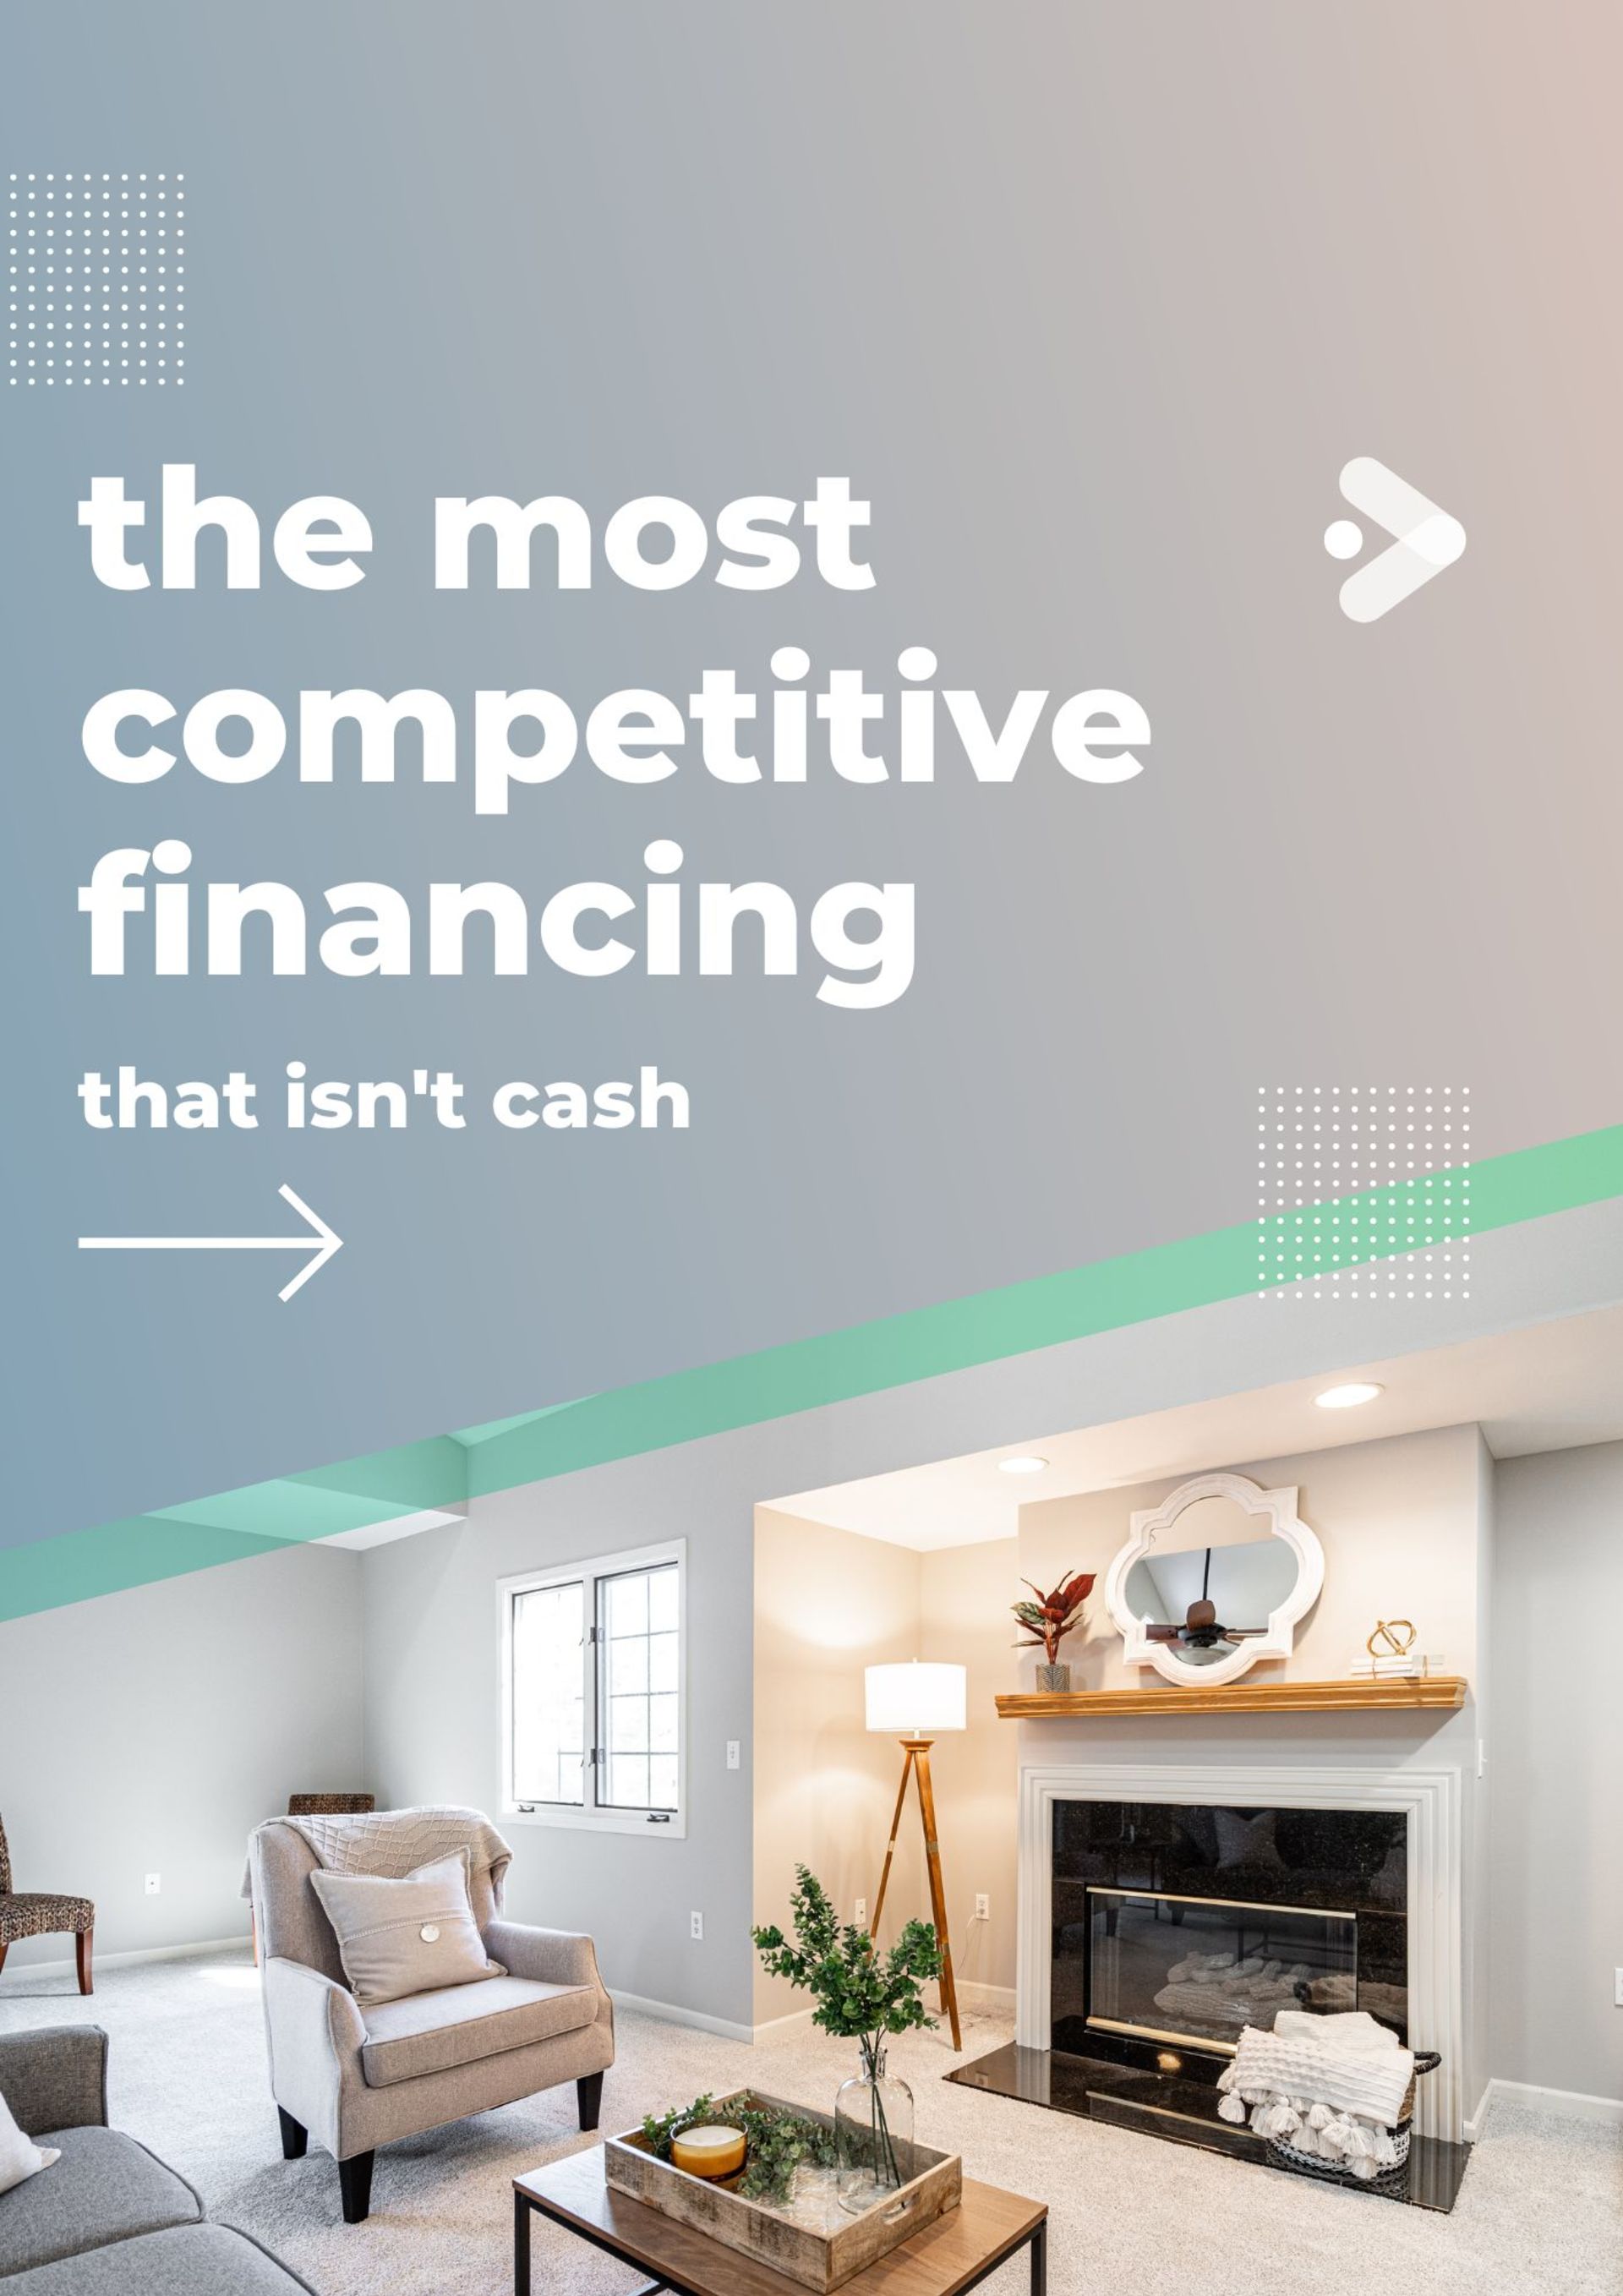 A local lender offers a unique way to compete with cash offers